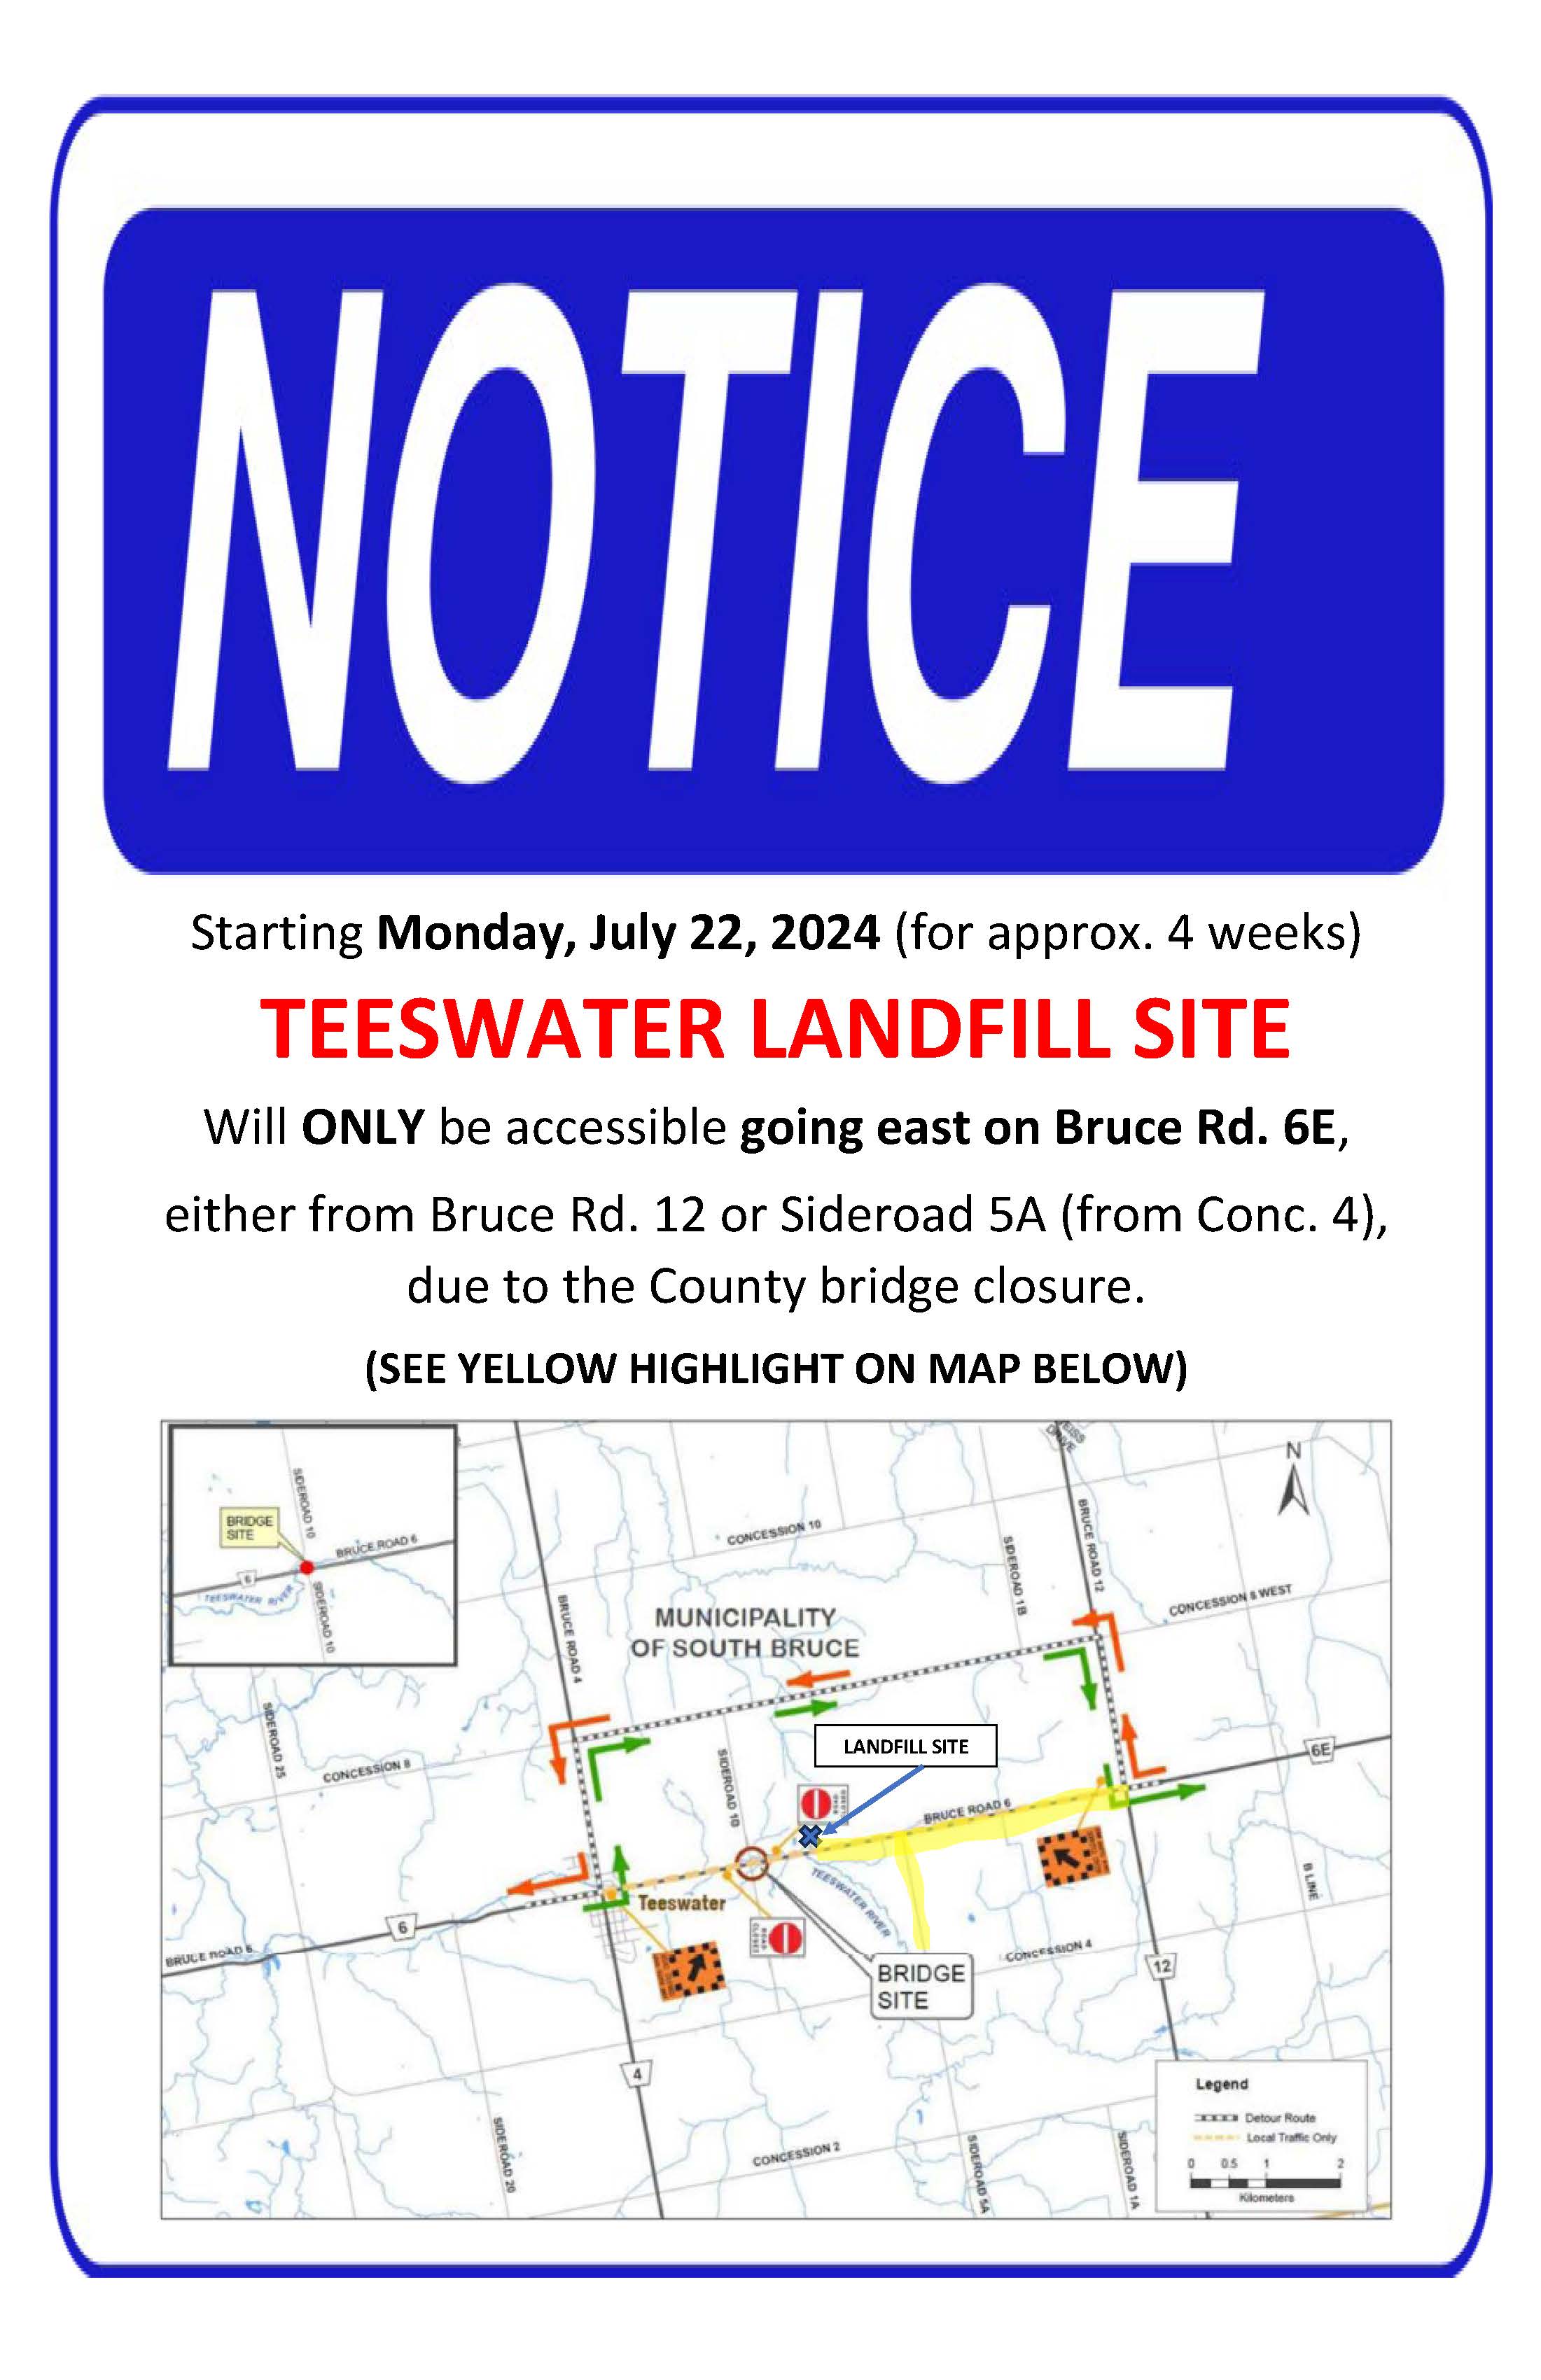 image of map showing how to access the Teeswater landfill site temporarily